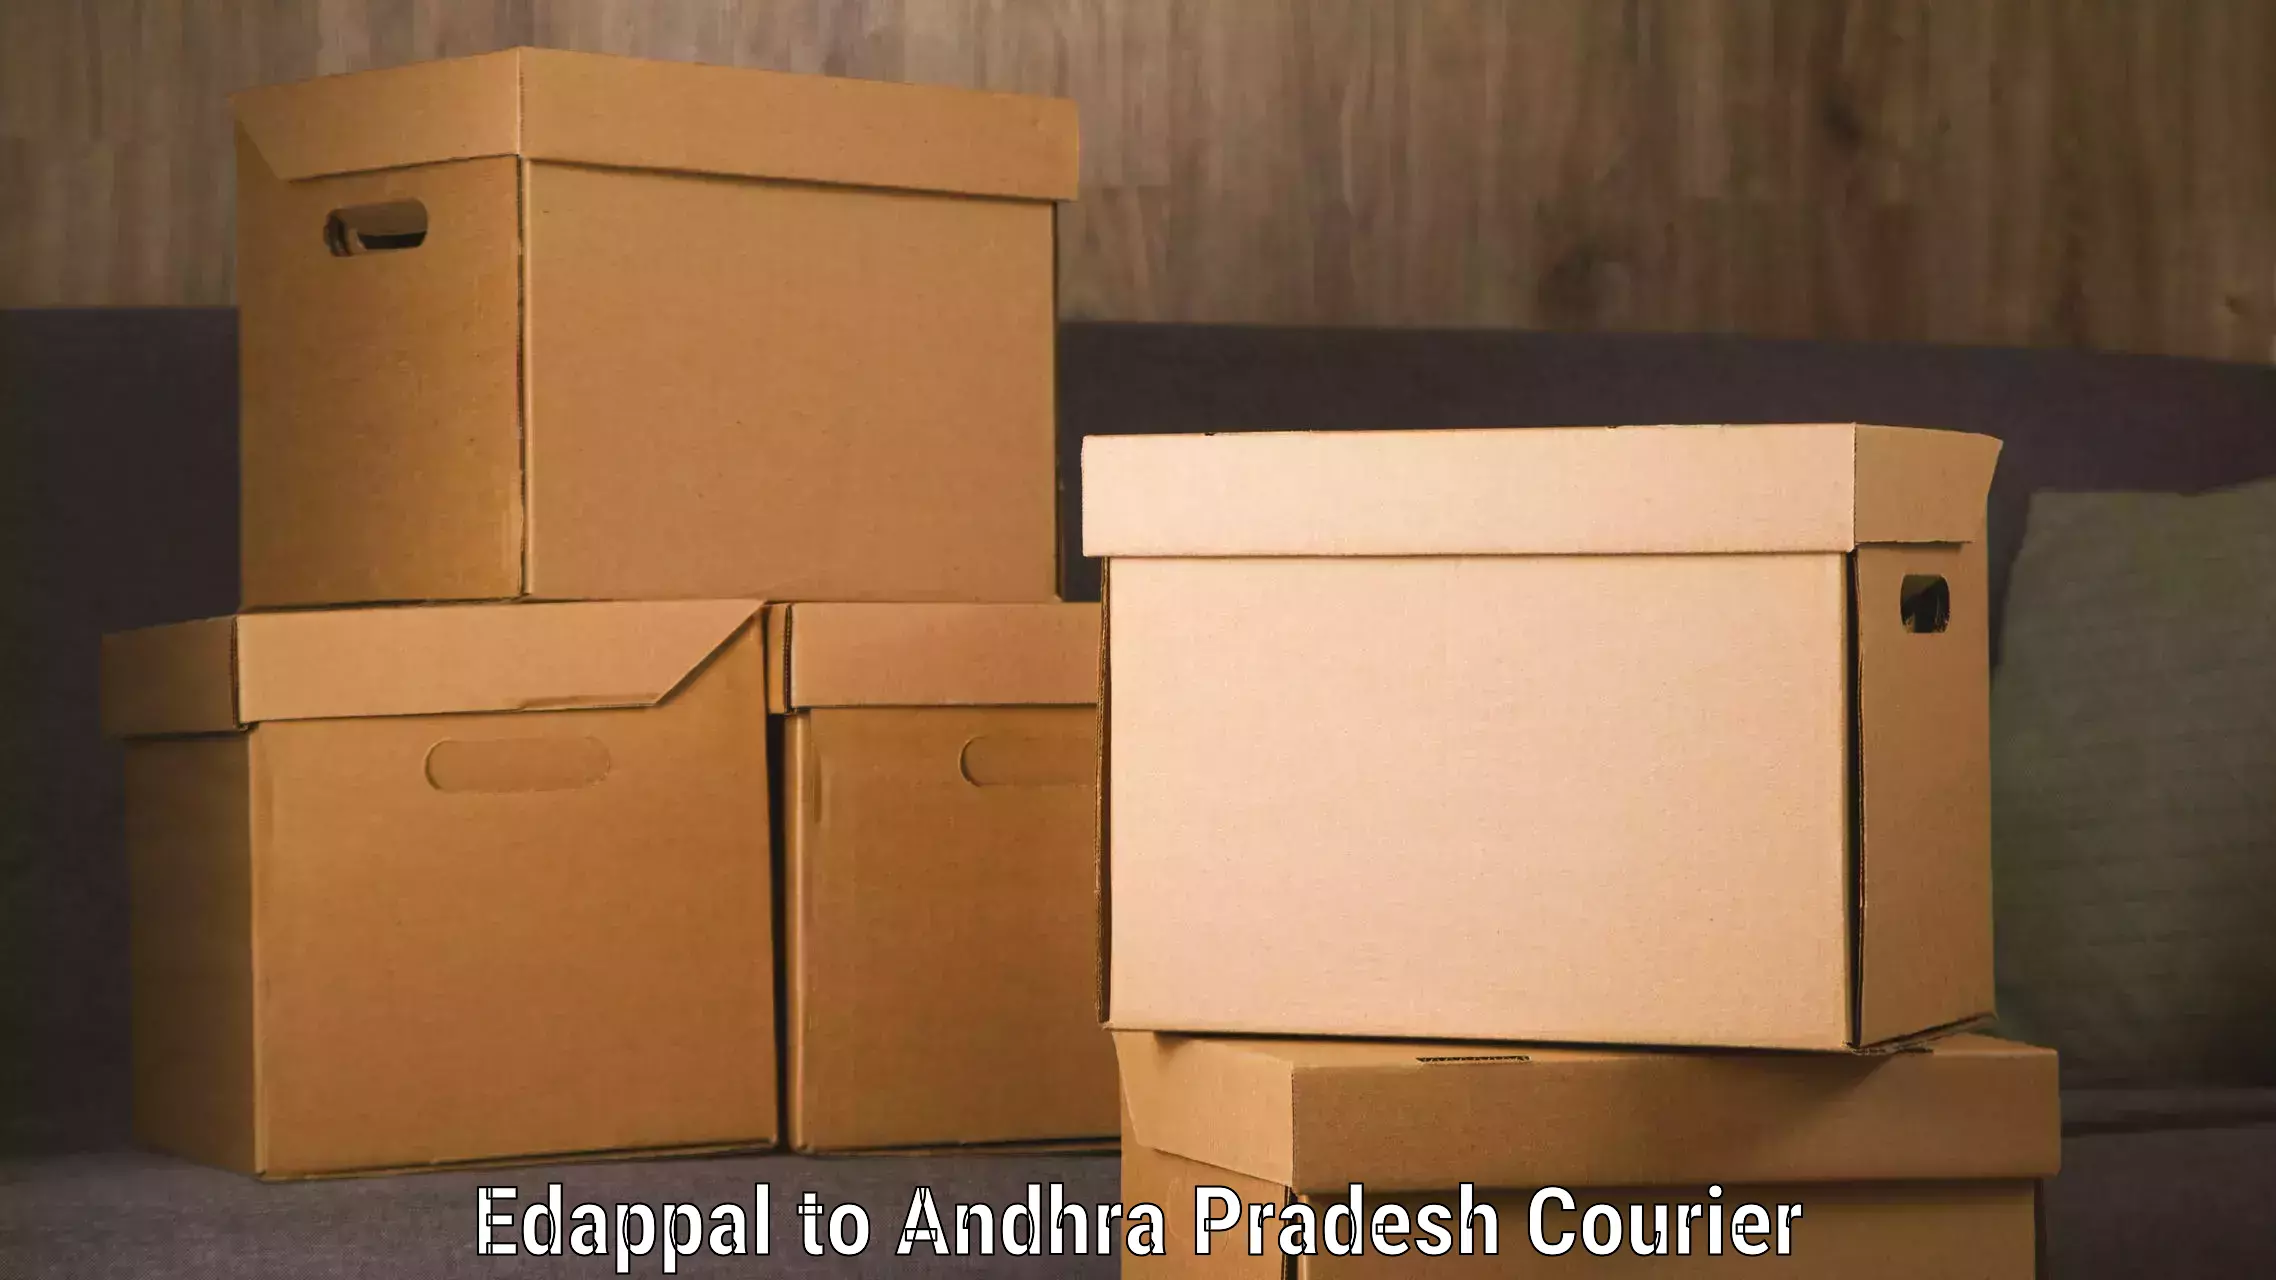 Global courier networks Edappal to Visakhapatnam Port